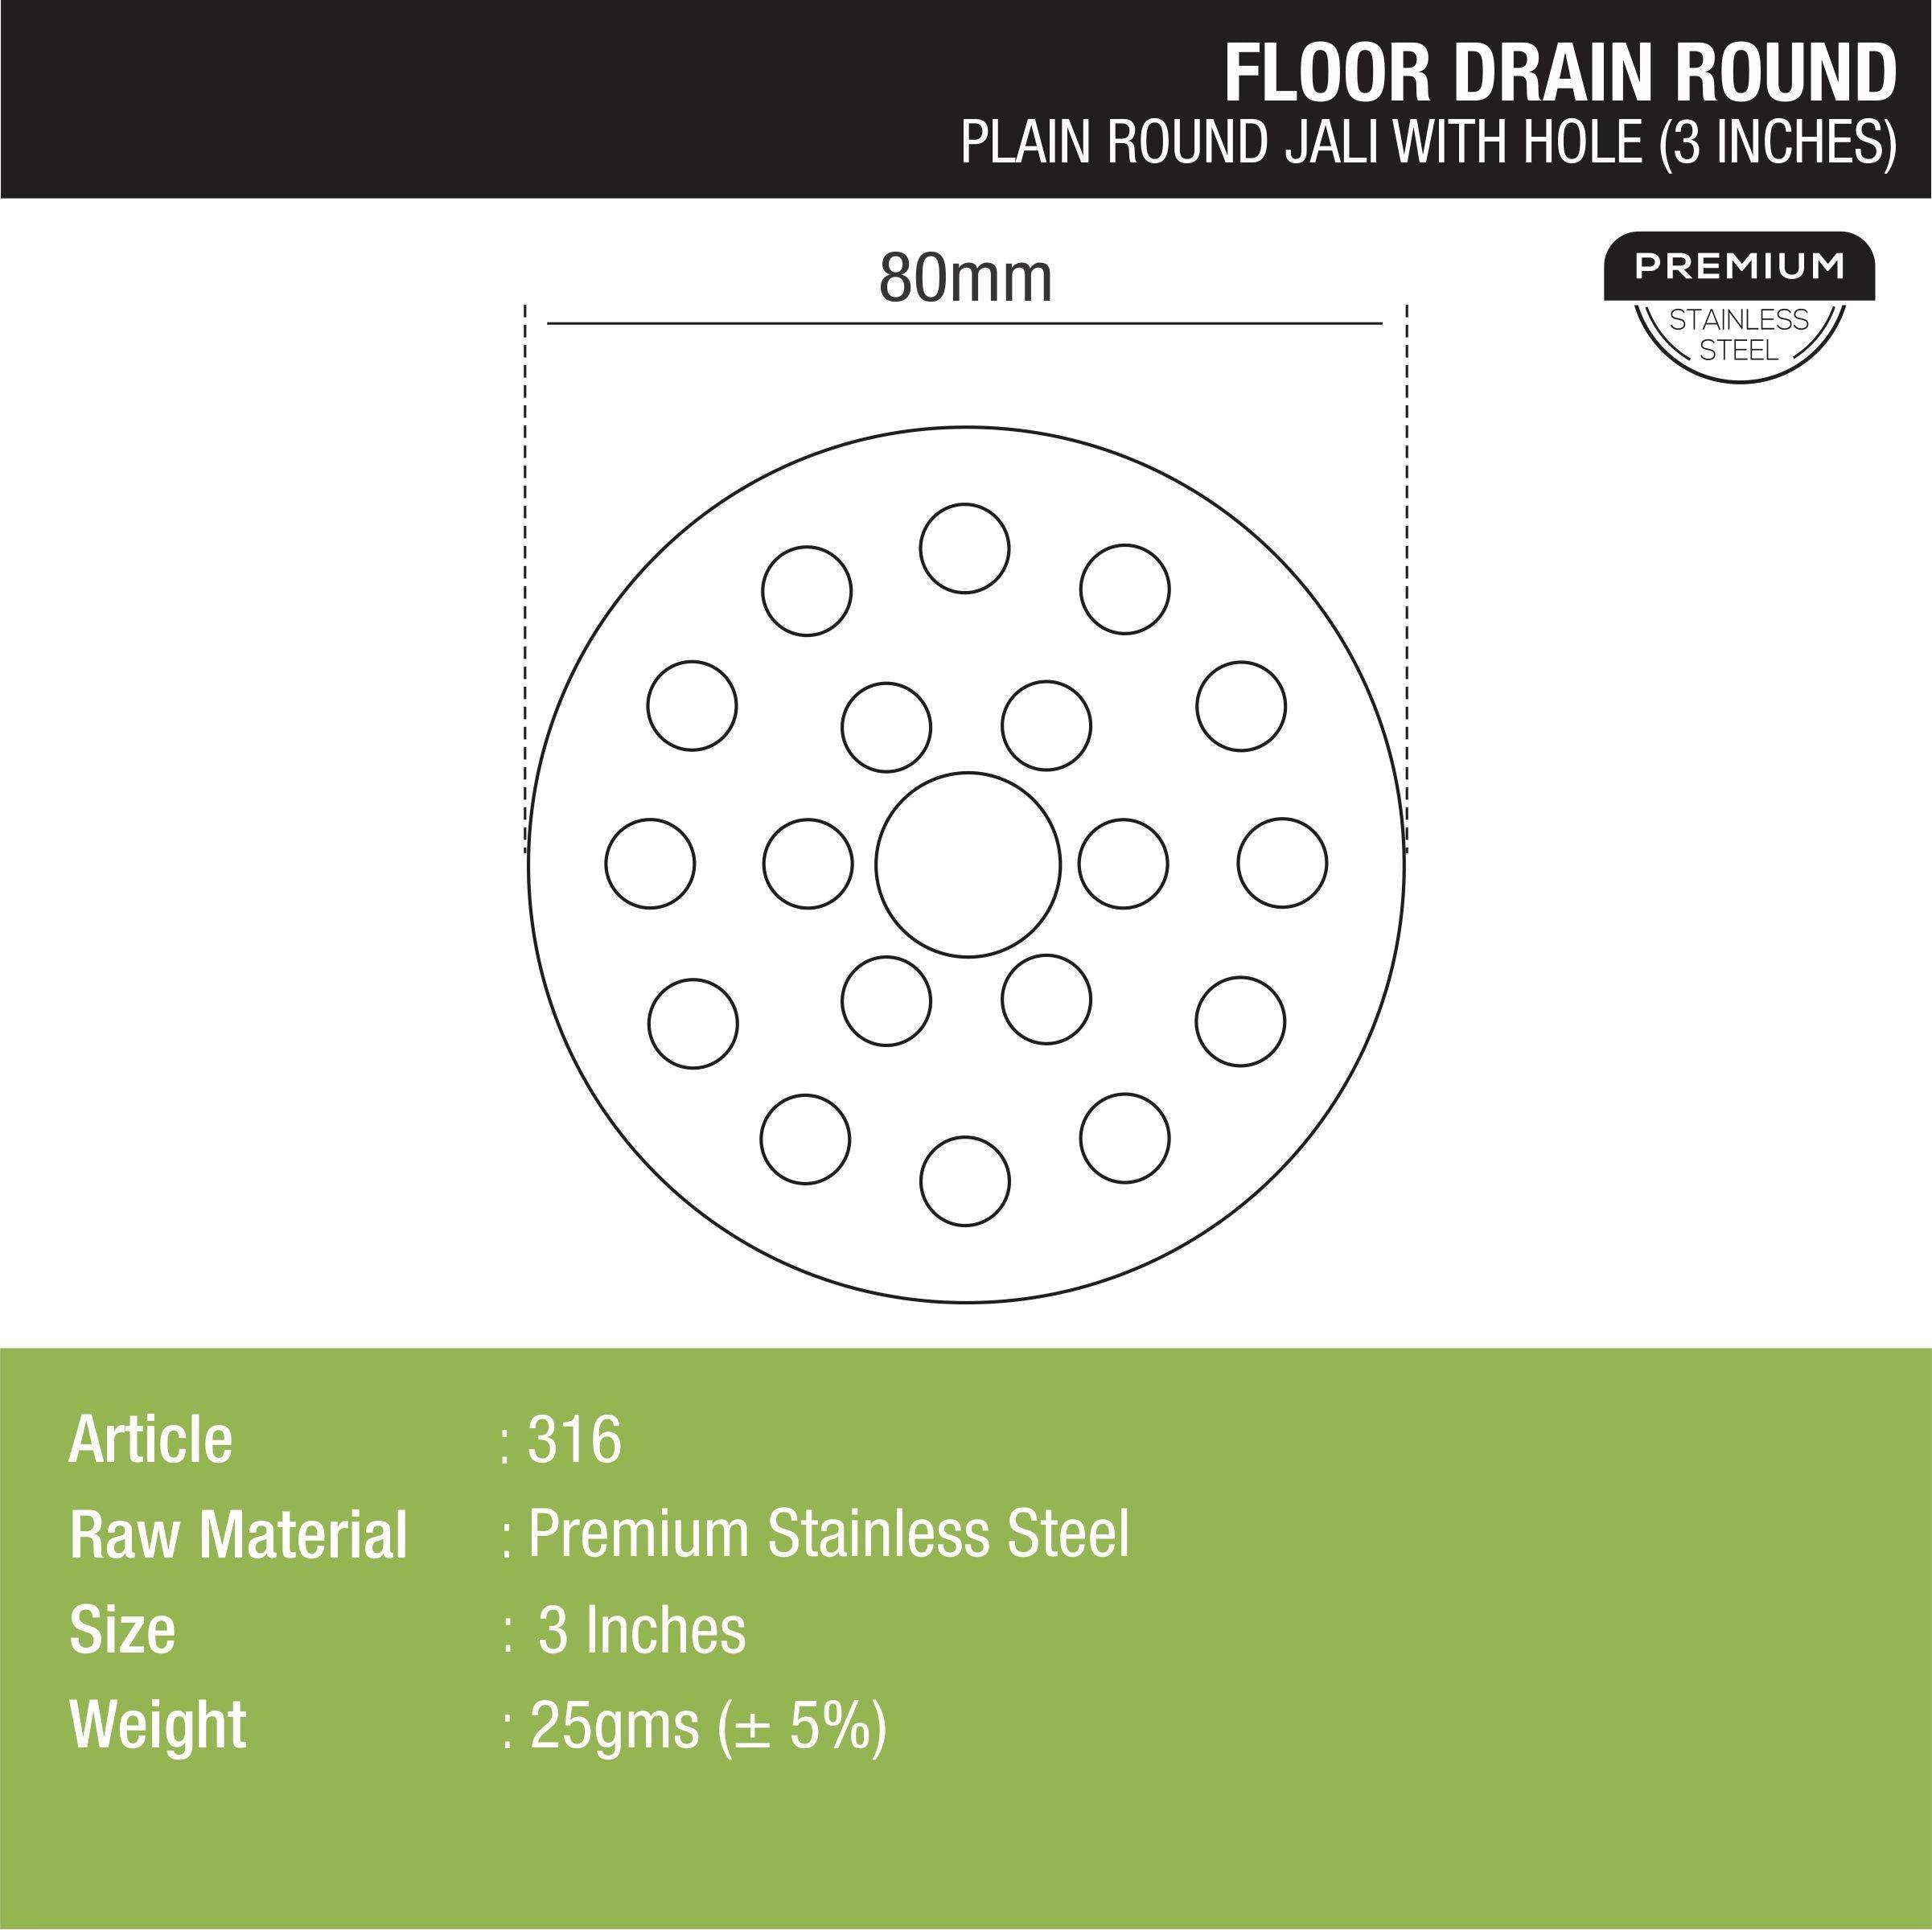 Plain Round Jali Floor Drain with Hole (3 inches) dimensions and sizes